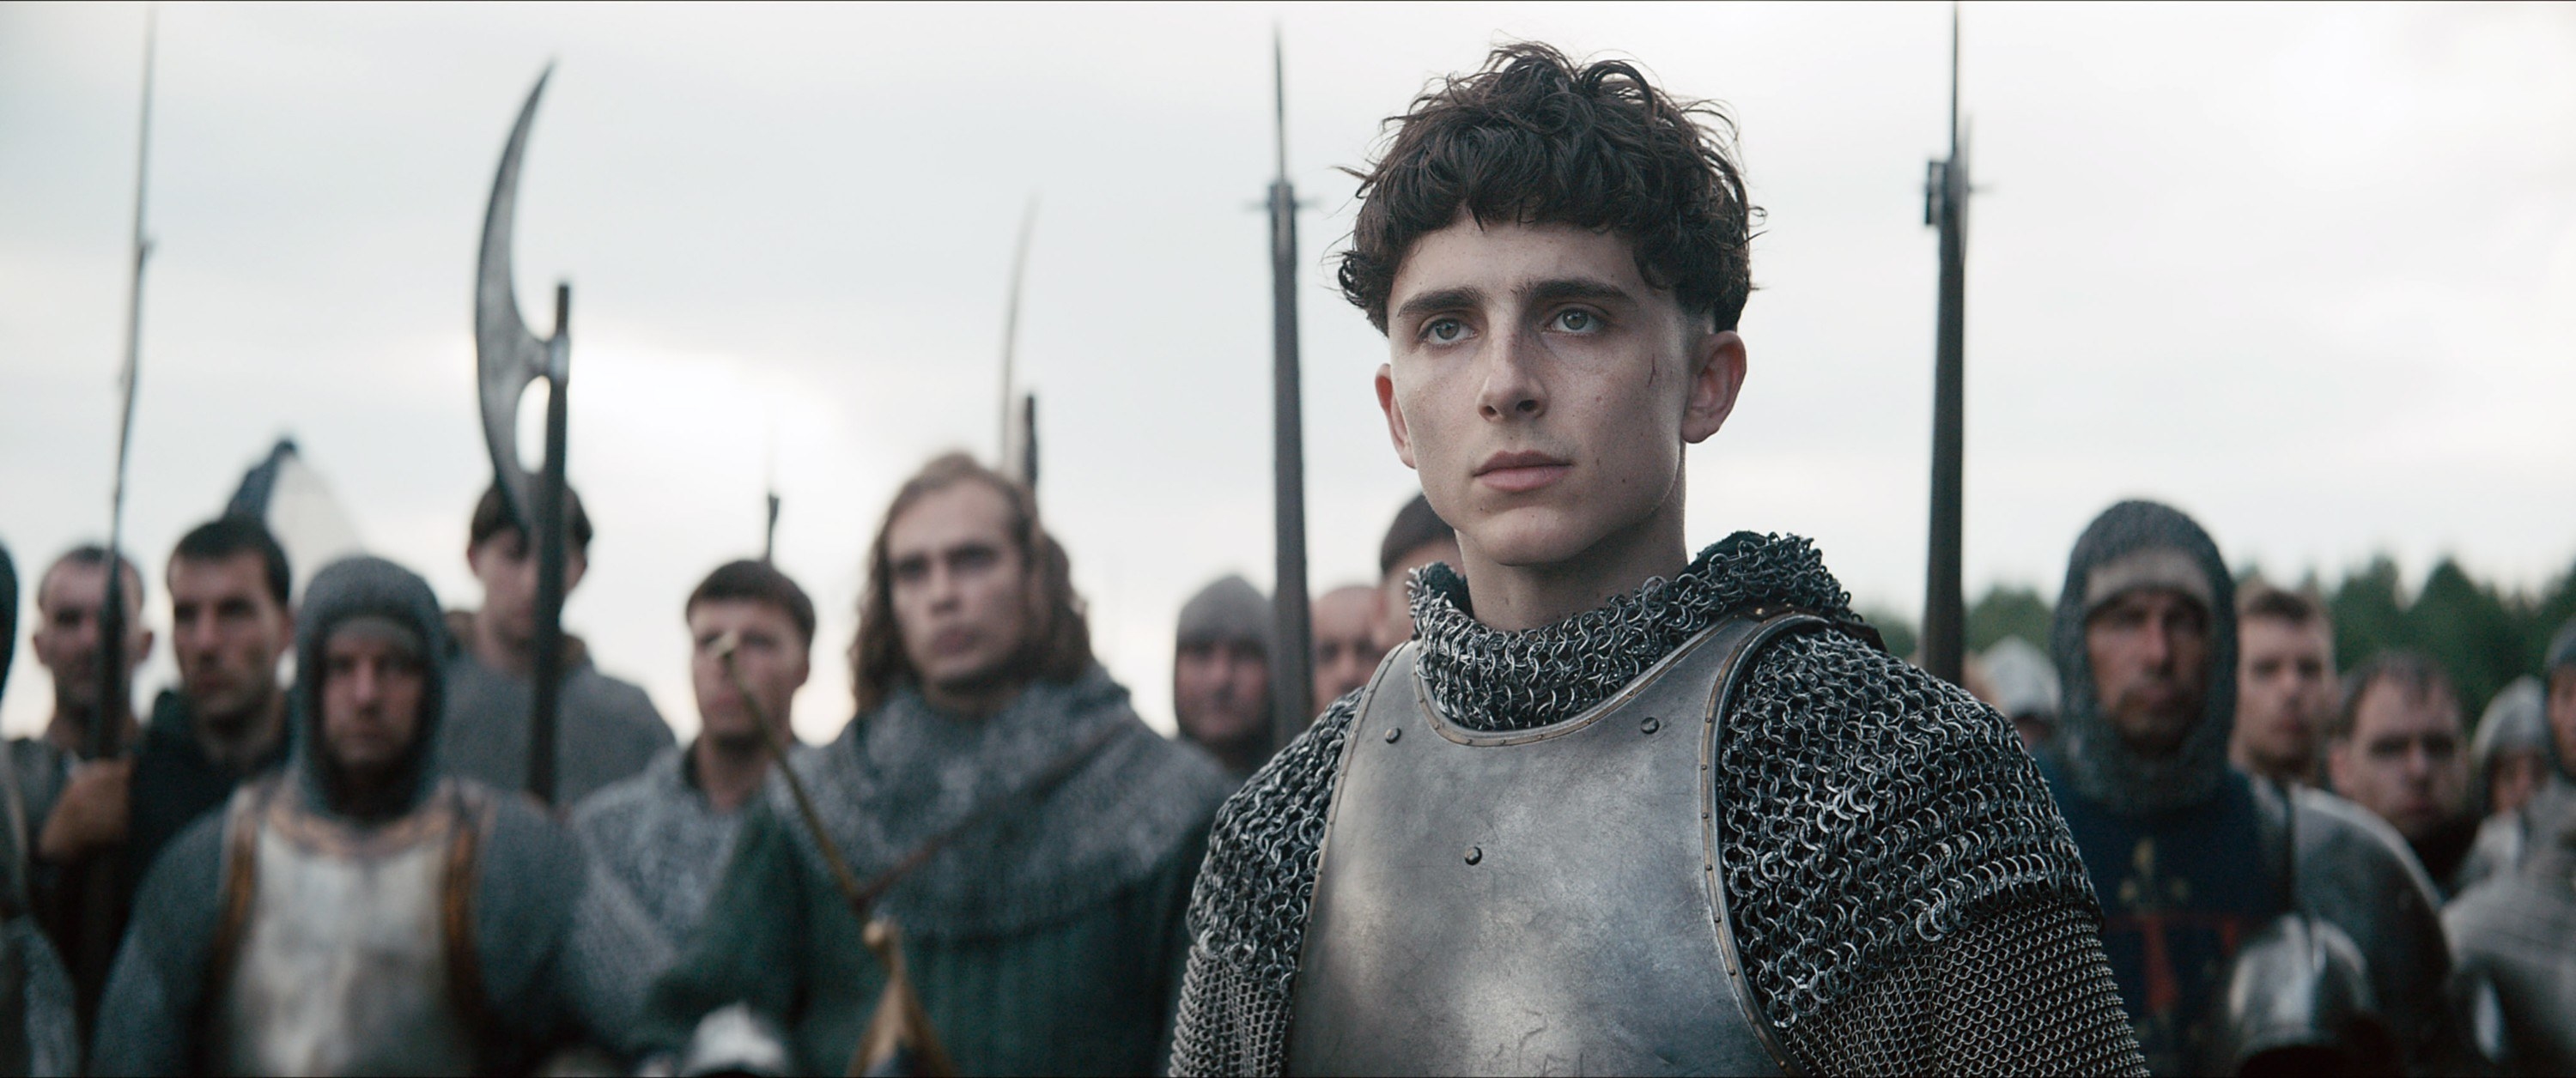 Timothee leads an army wearing chainmale